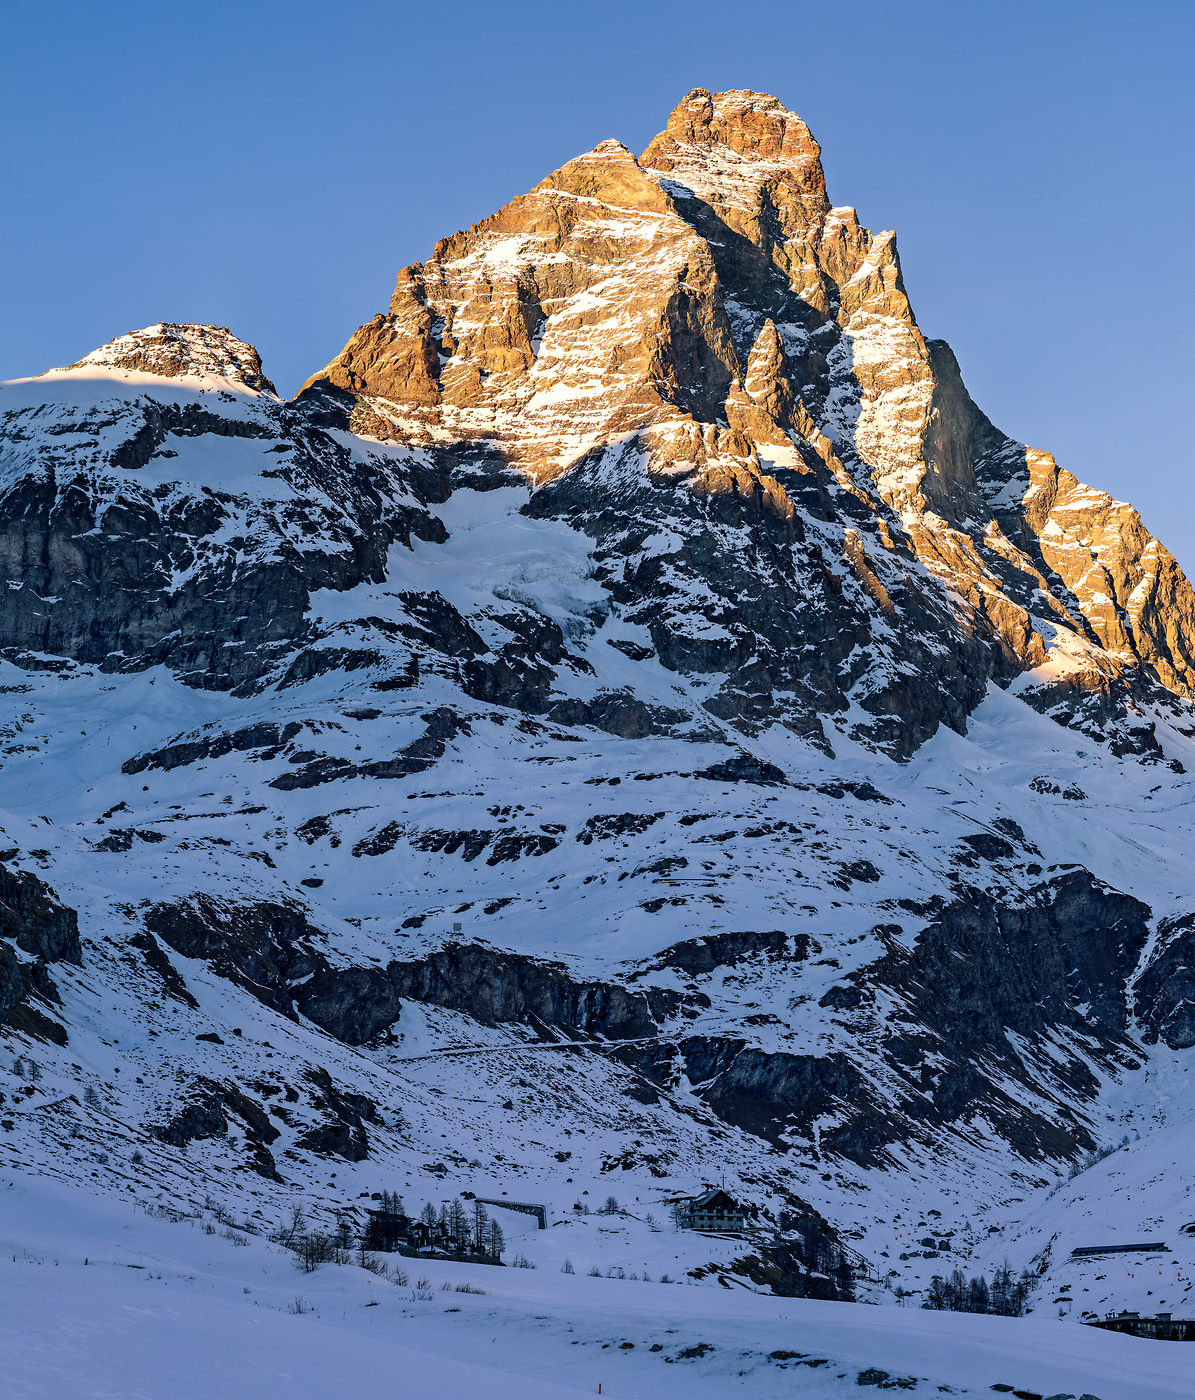 671 megapixels! A very high resolution, large-format VAST photo print of the Matterhorn; photograph created by Duilio Fiorille in Breuil Cervinia, Valtournenche, Valle d'Aosta, Italy.